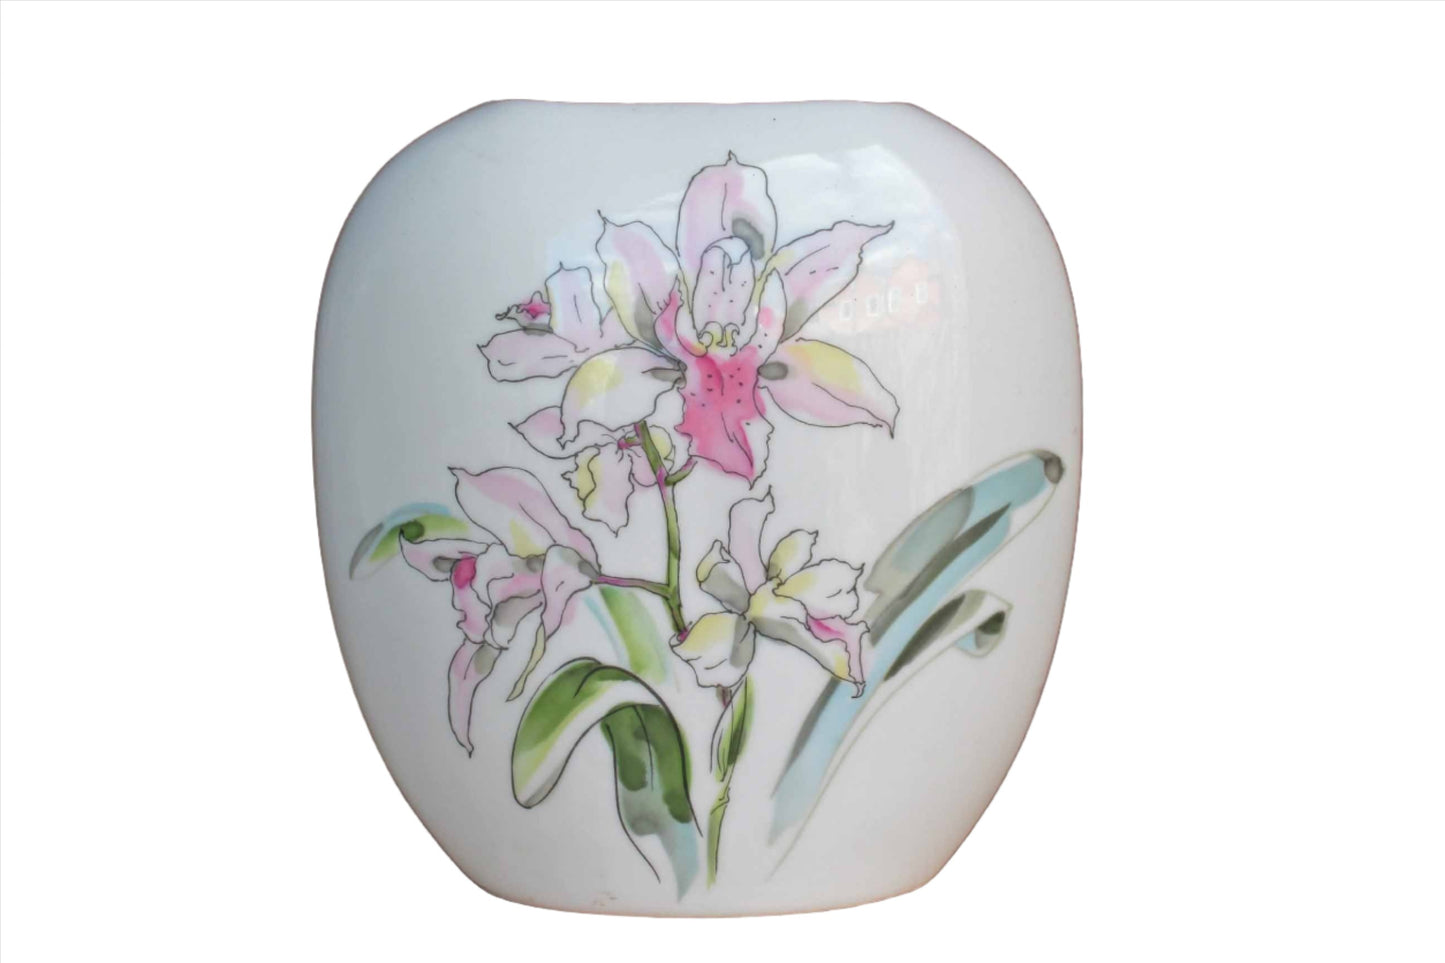 Porcelain Pillow Vase Decorated with Pink Flowers, Made in Japan